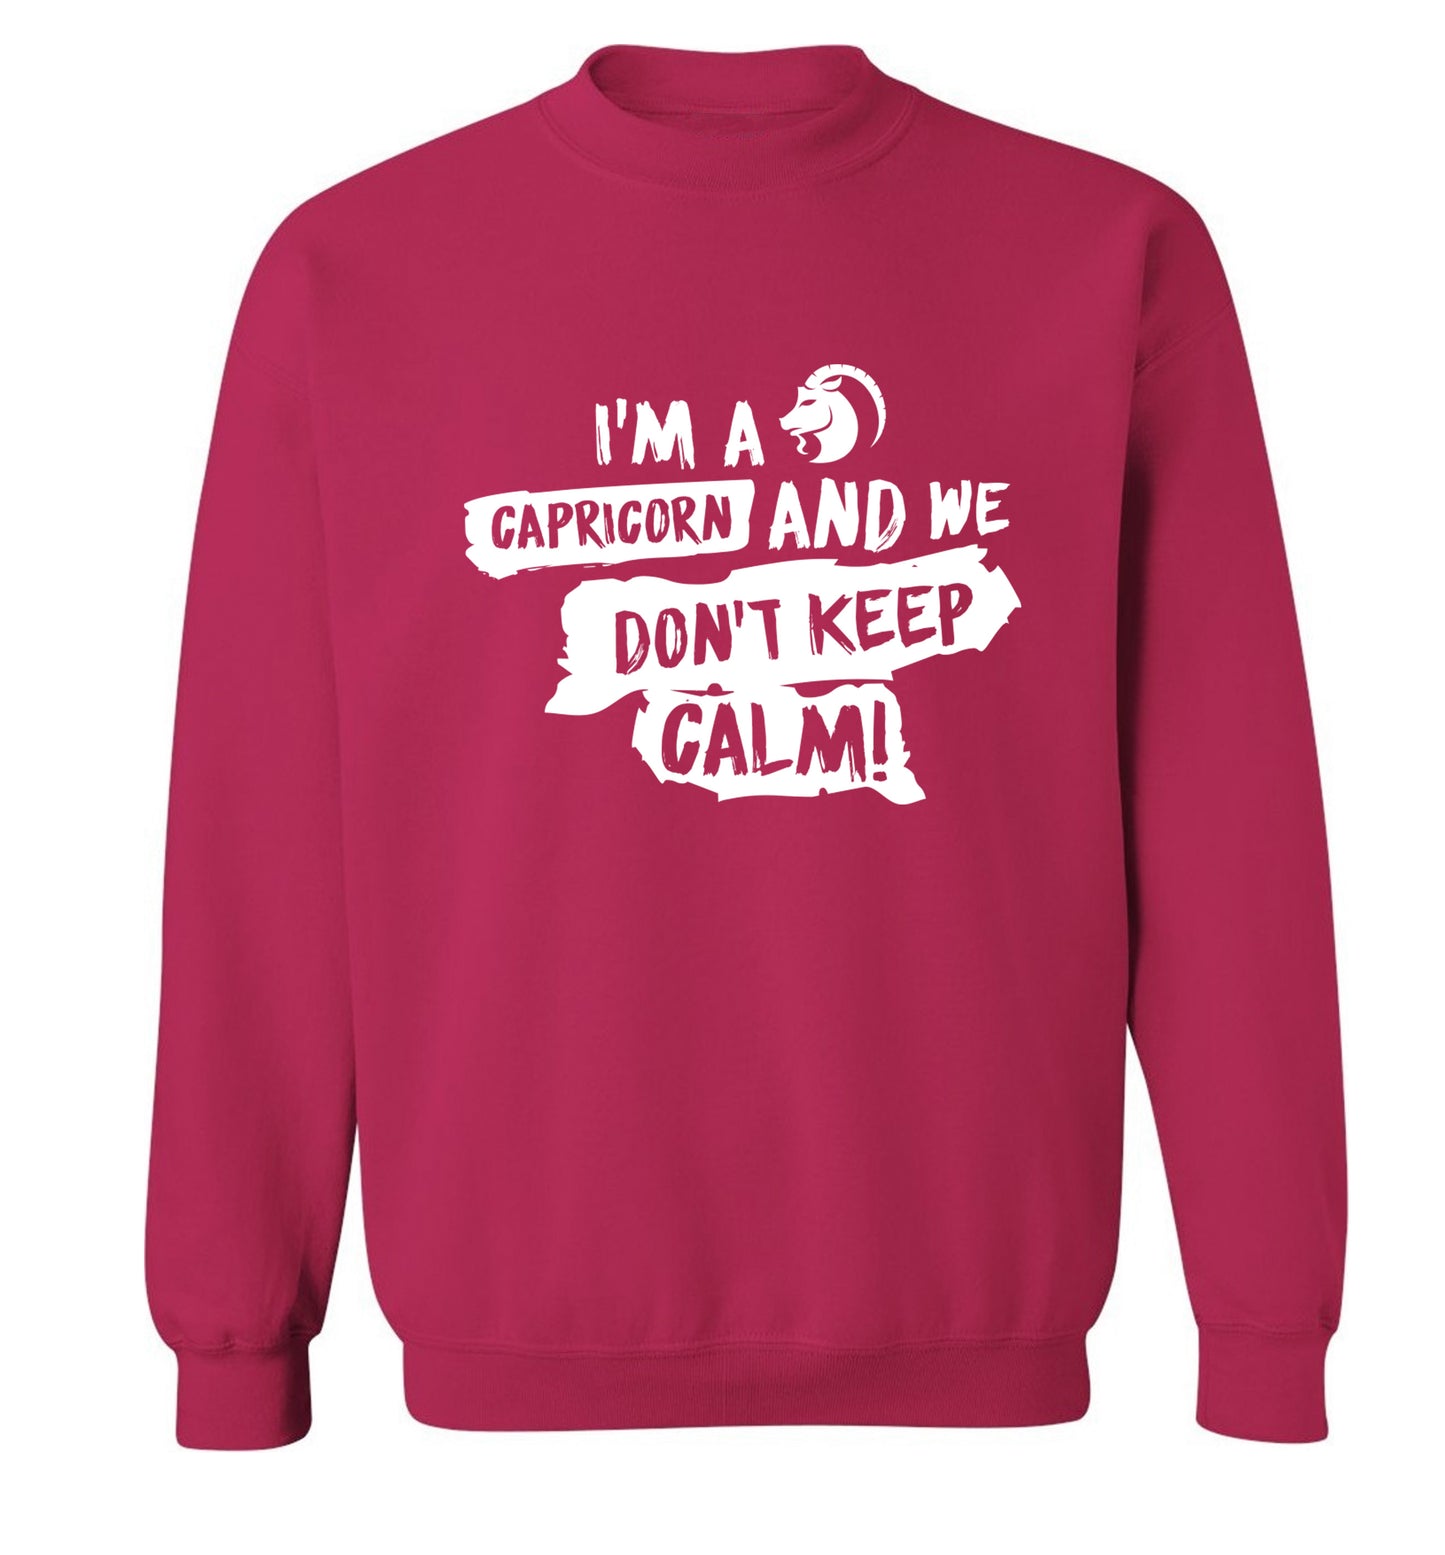 I'm a capricorn and we don't keep calm Adult's unisex pink Sweater 2XL